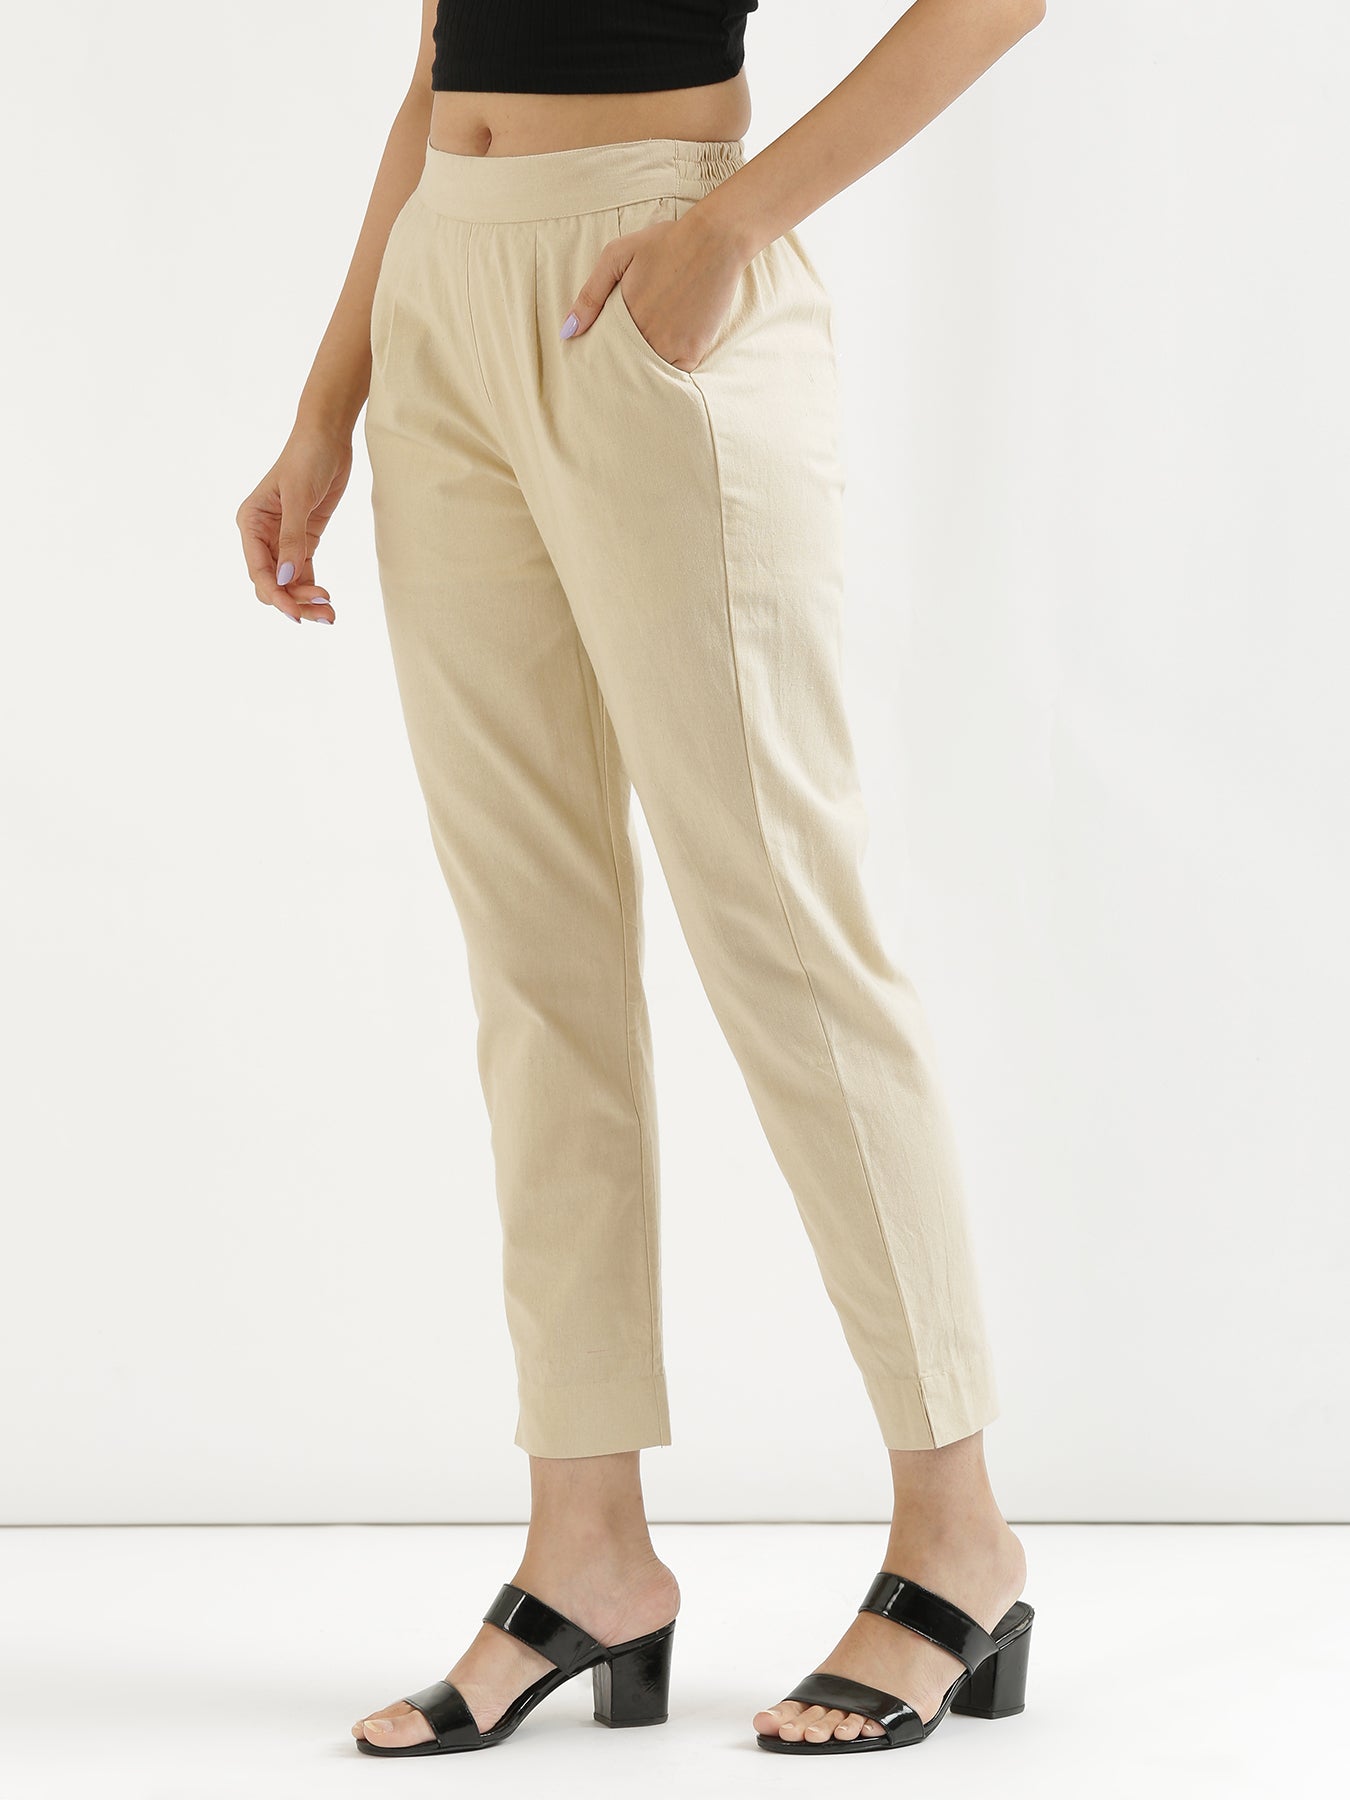 Buy Trousers & Joggers for Women Online at Best Prices - Westside